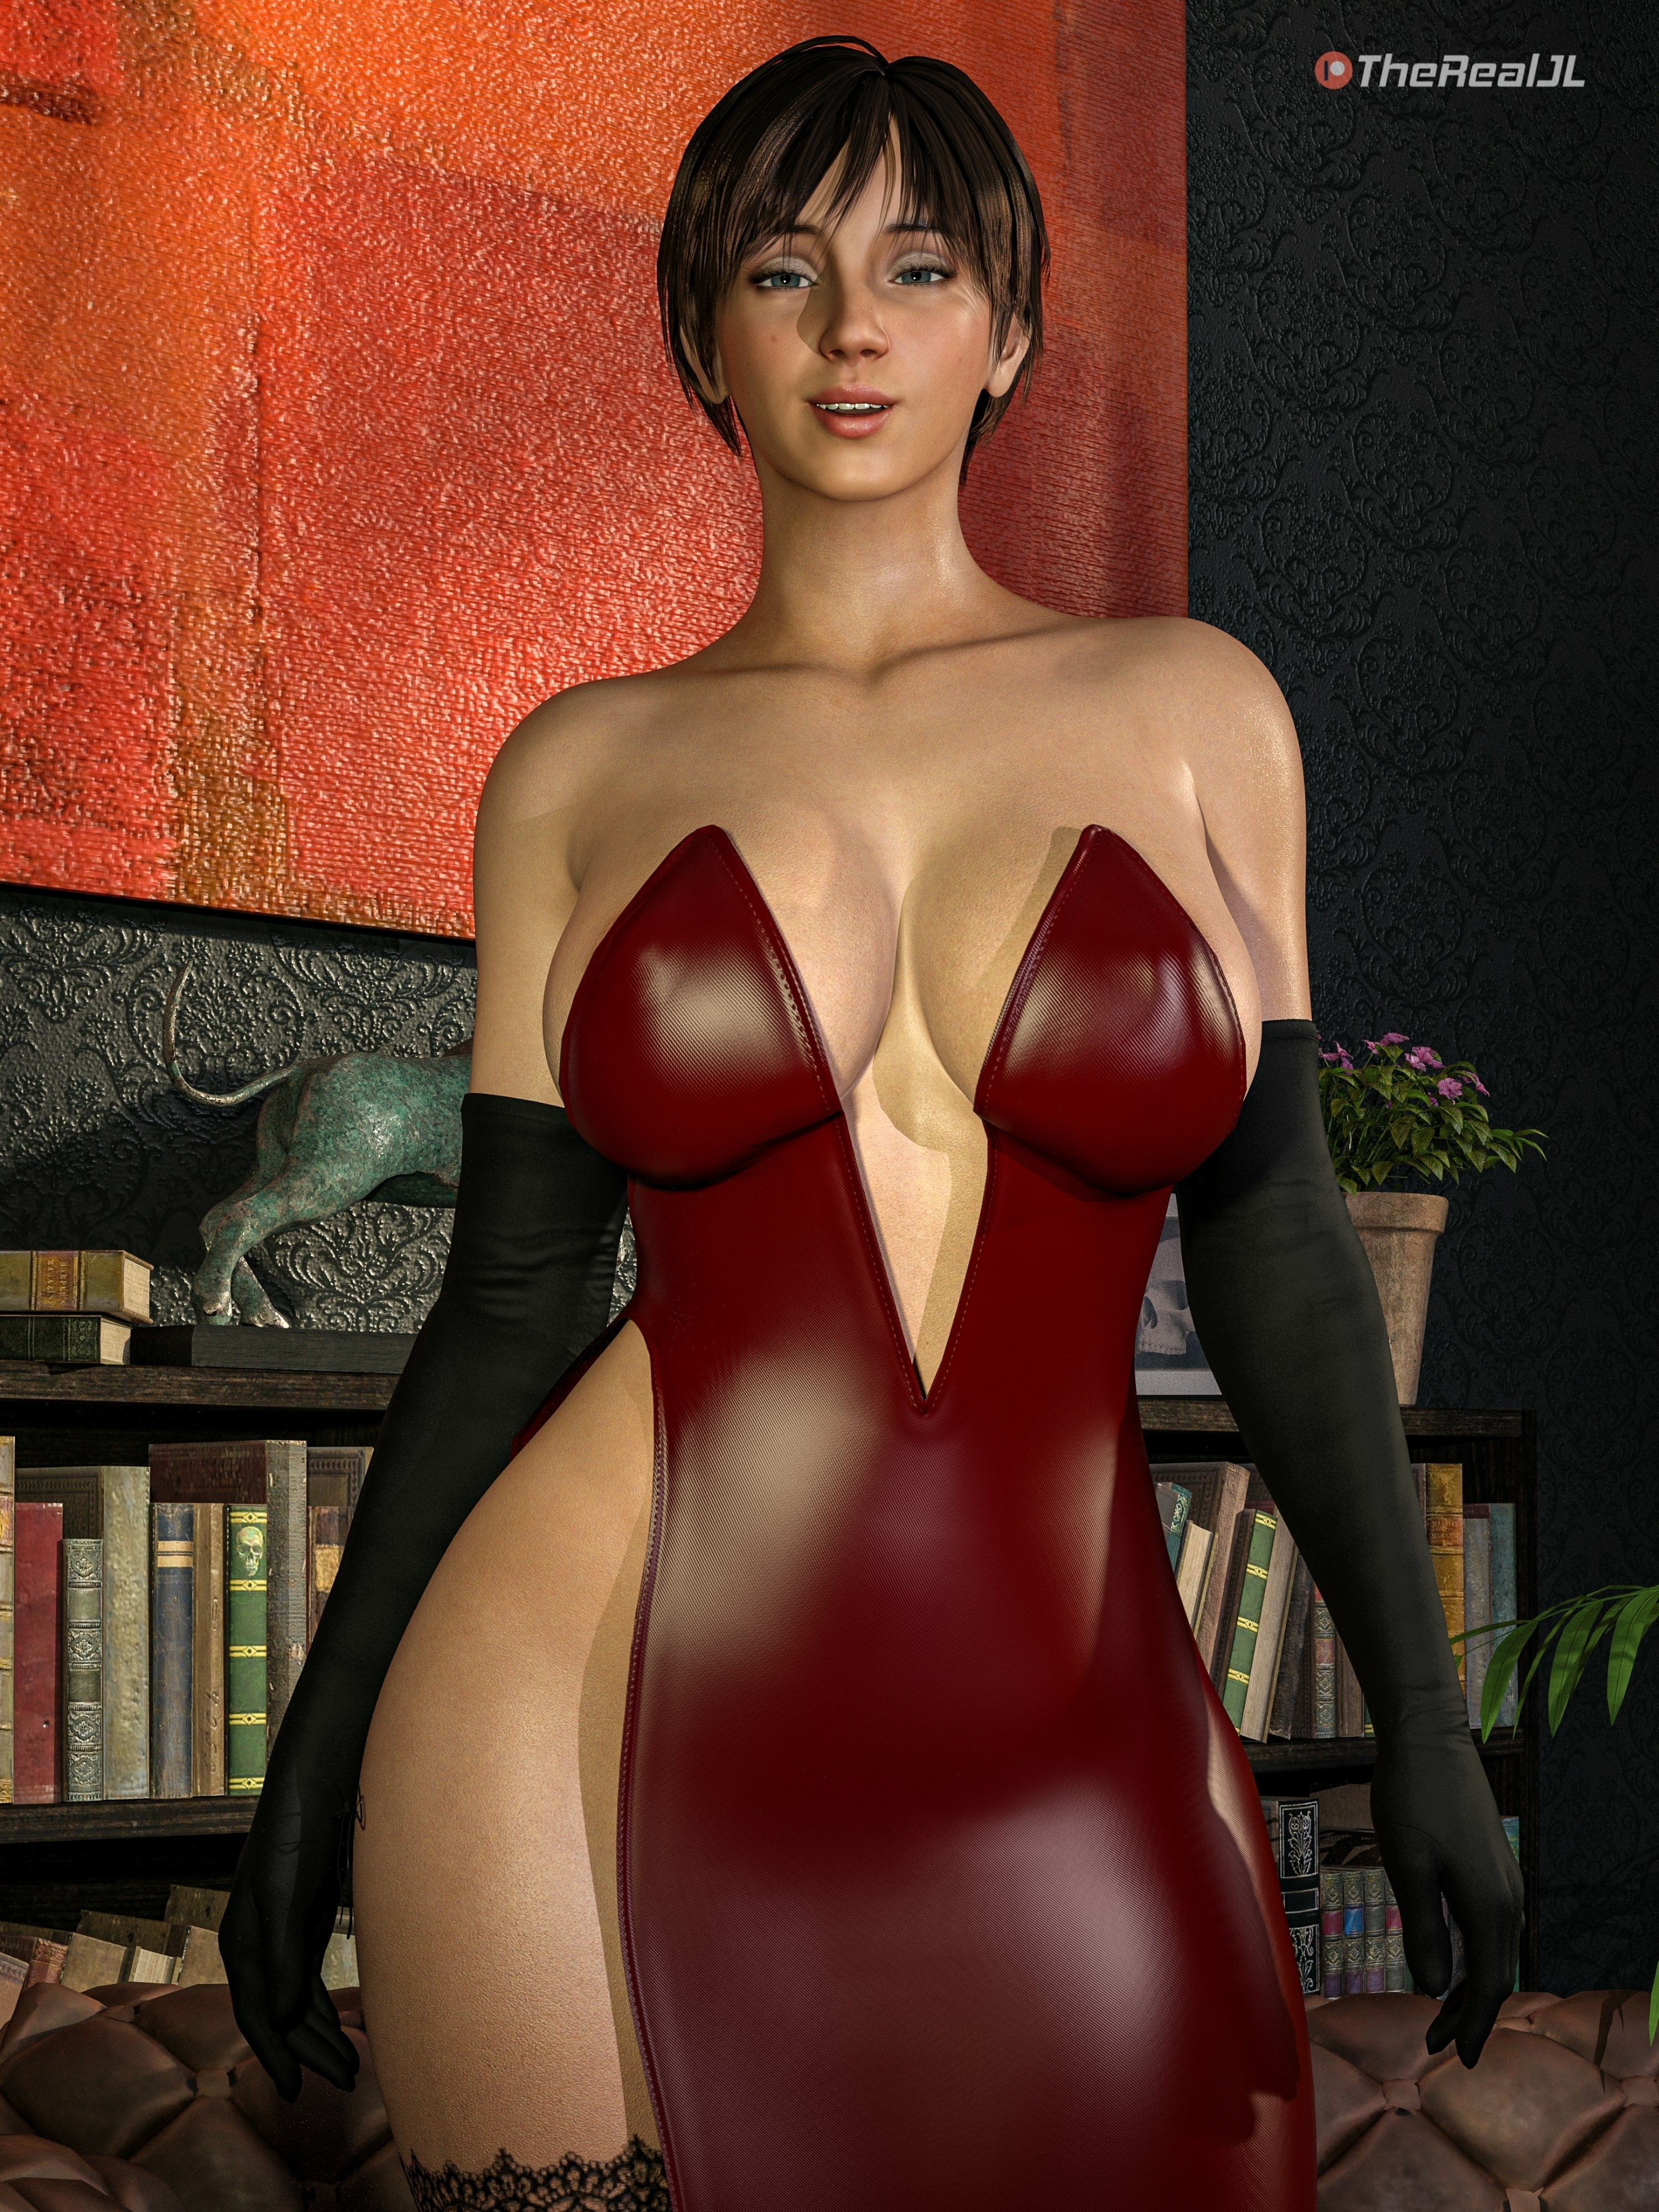 Rebecca Chambers - Lounge Resident Evil Rebecca Chambers Sexy Lingerie Lingerie Nipples Pussy Shaved Pussy Boobs Big boobs Tits Big Tits Cake Ass Big Ass Sexy Horny Face Horny 3d Porn